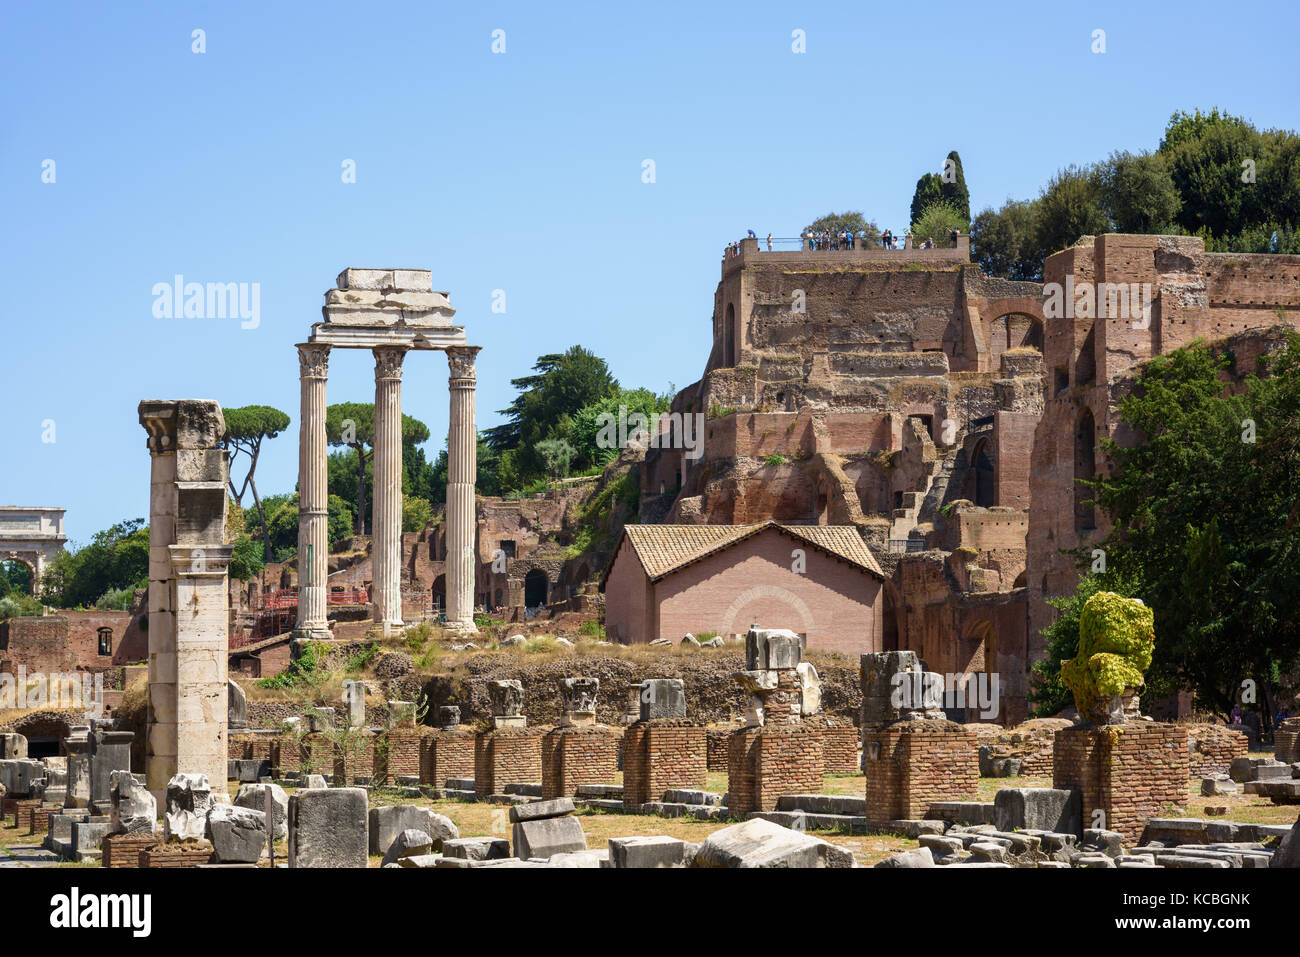 Temple of Castor and Pollux, Rome, Italy Stock Photo